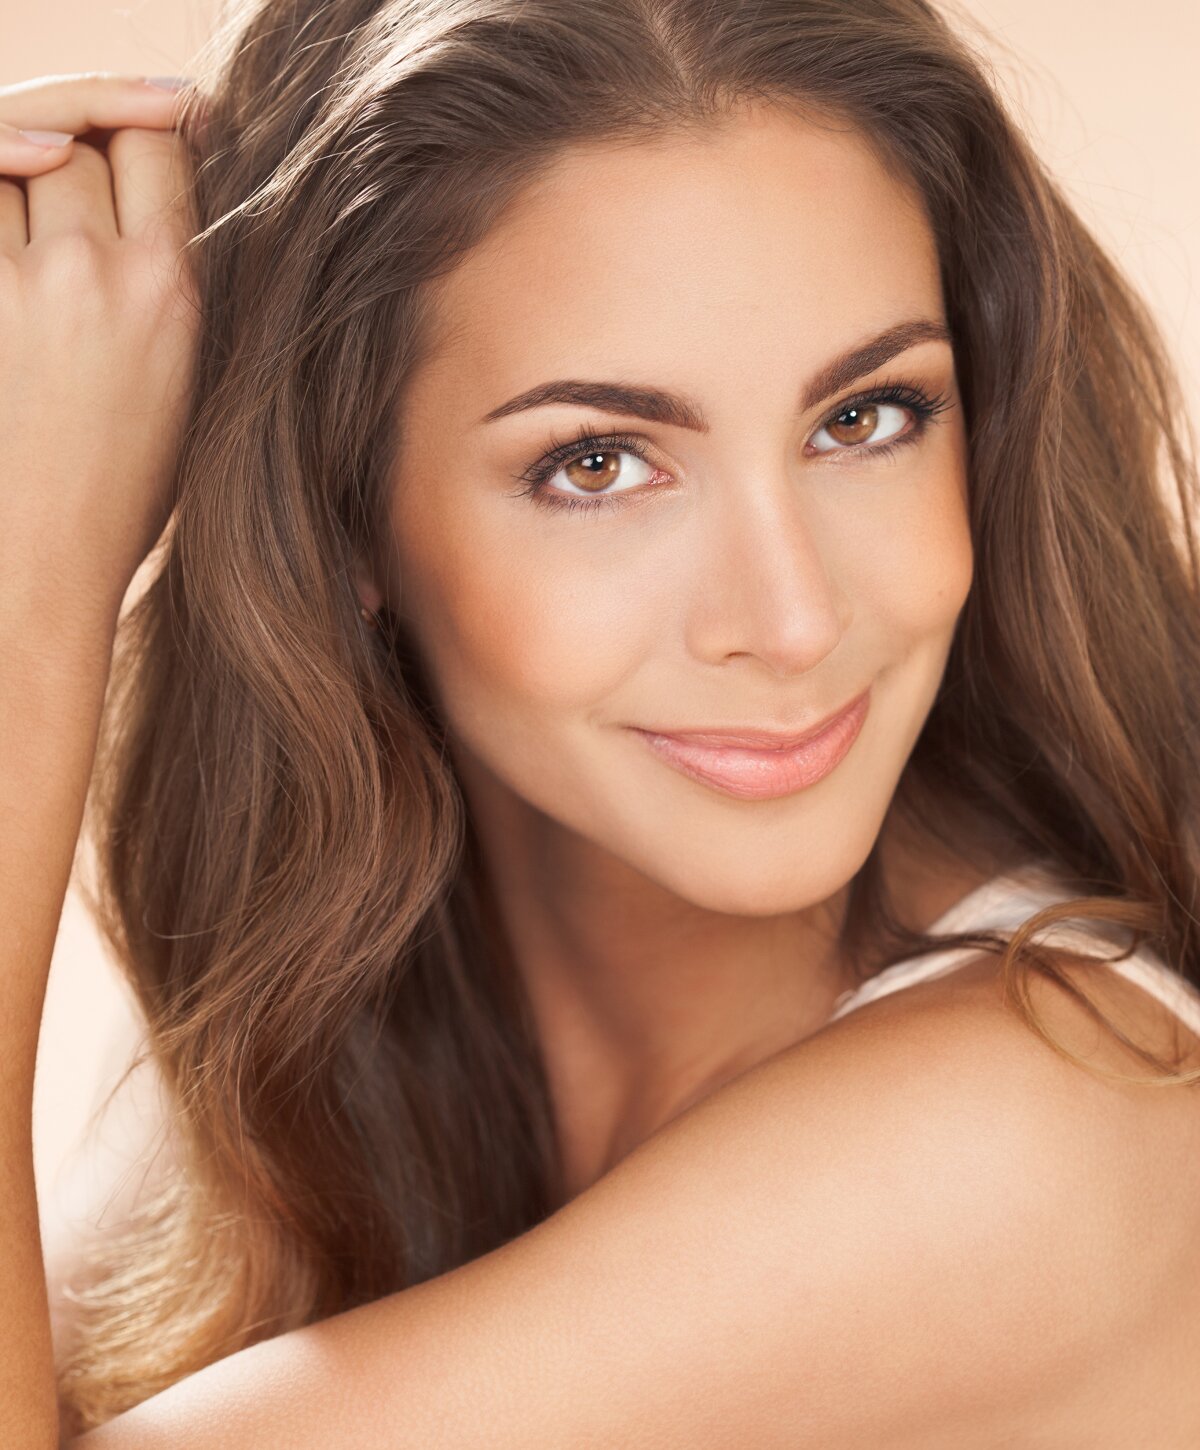 McKinney microdermabrasion model with brown hair